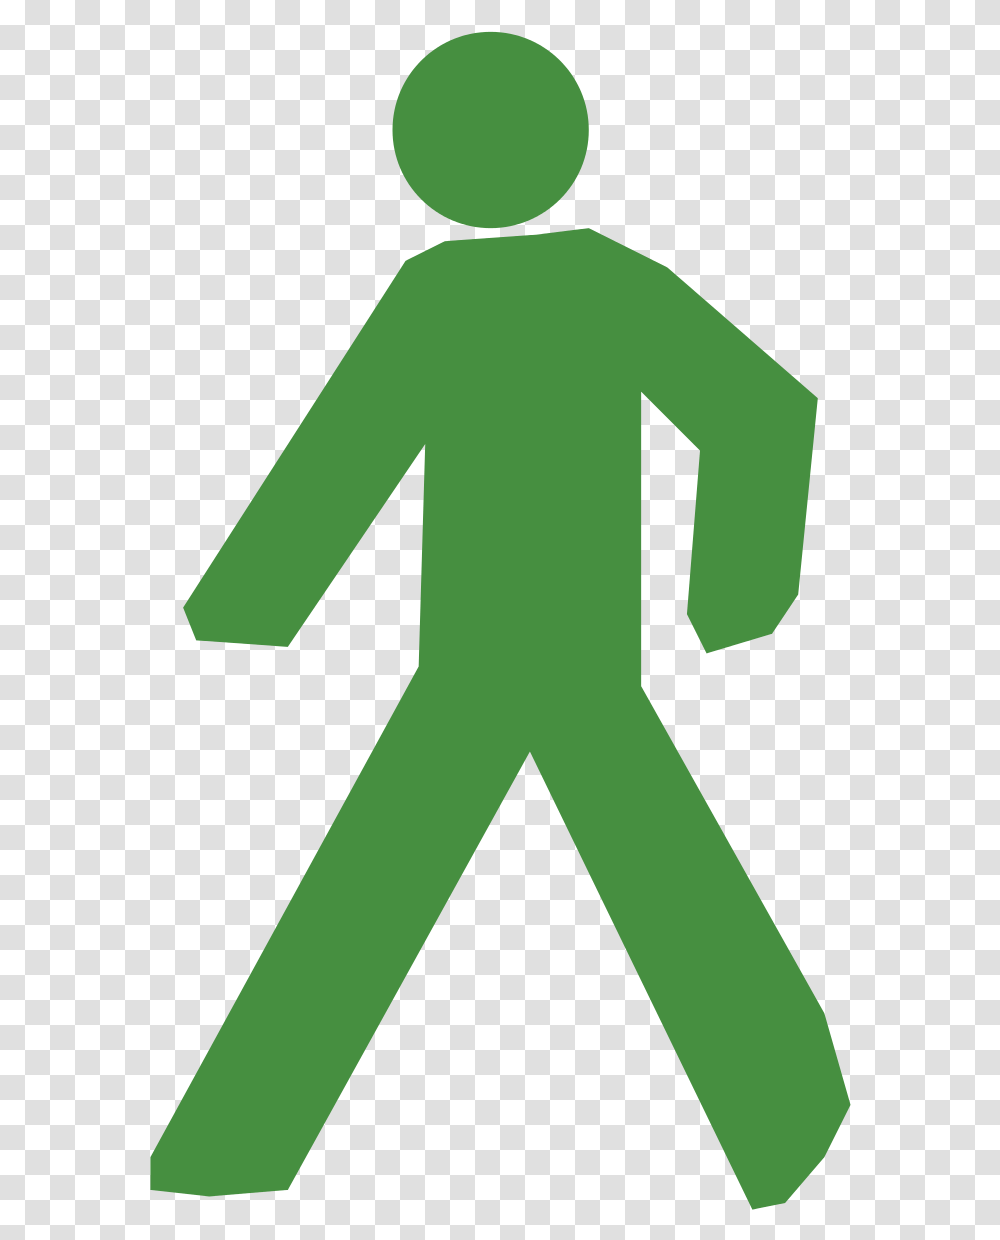 File Person Man Icon No Background, Pedestrian, Symbol, Sign, Road Sign Transparent Png